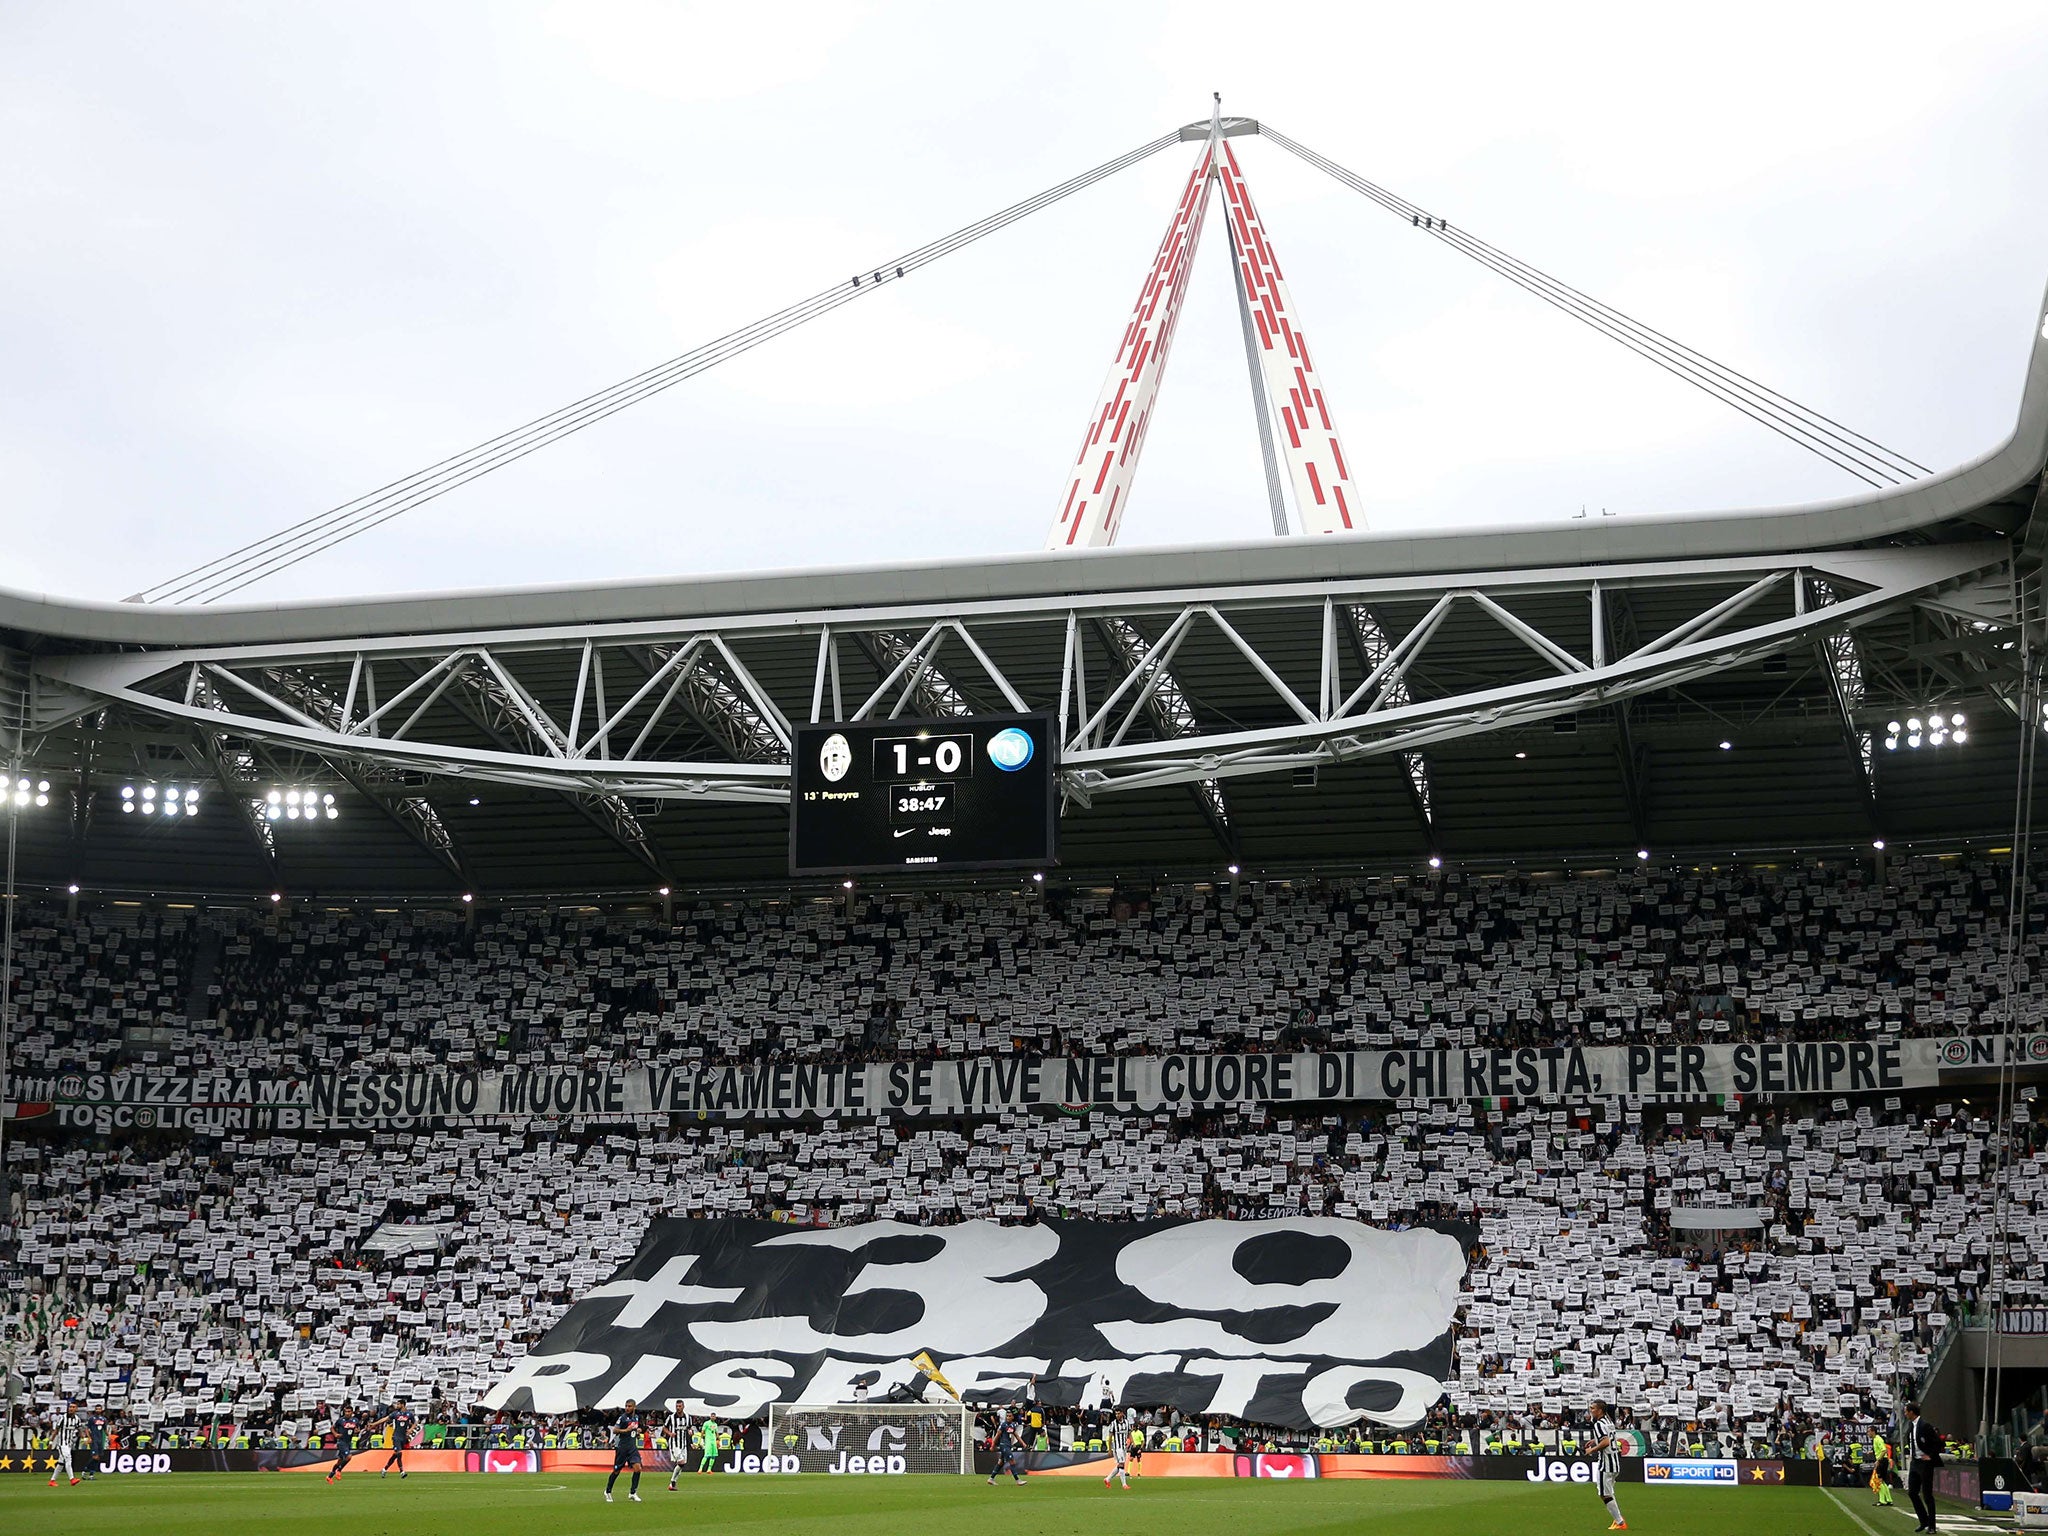 Juventus fans unfurl a tribute during their match against Napoli to the 39 fans who died at Heysel